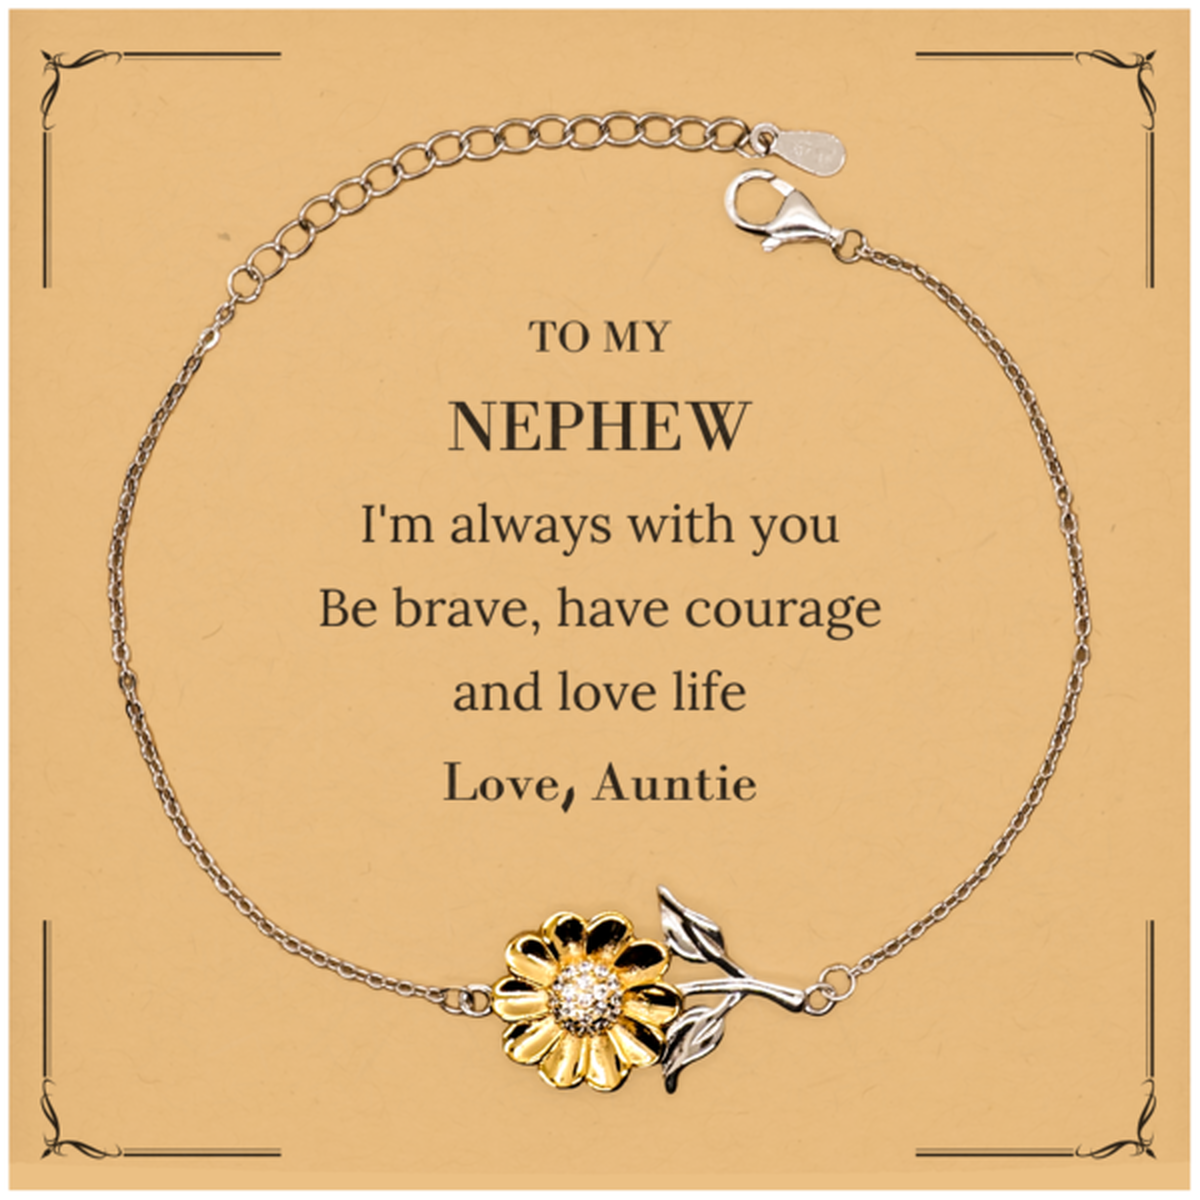 To My Nephew Gifts from Auntie, Unique Sunflower Bracelet Inspirational Christmas Birthday Graduation Gifts for Nephew I'm always with you. Be brave, have courage and love life. Love, Auntie